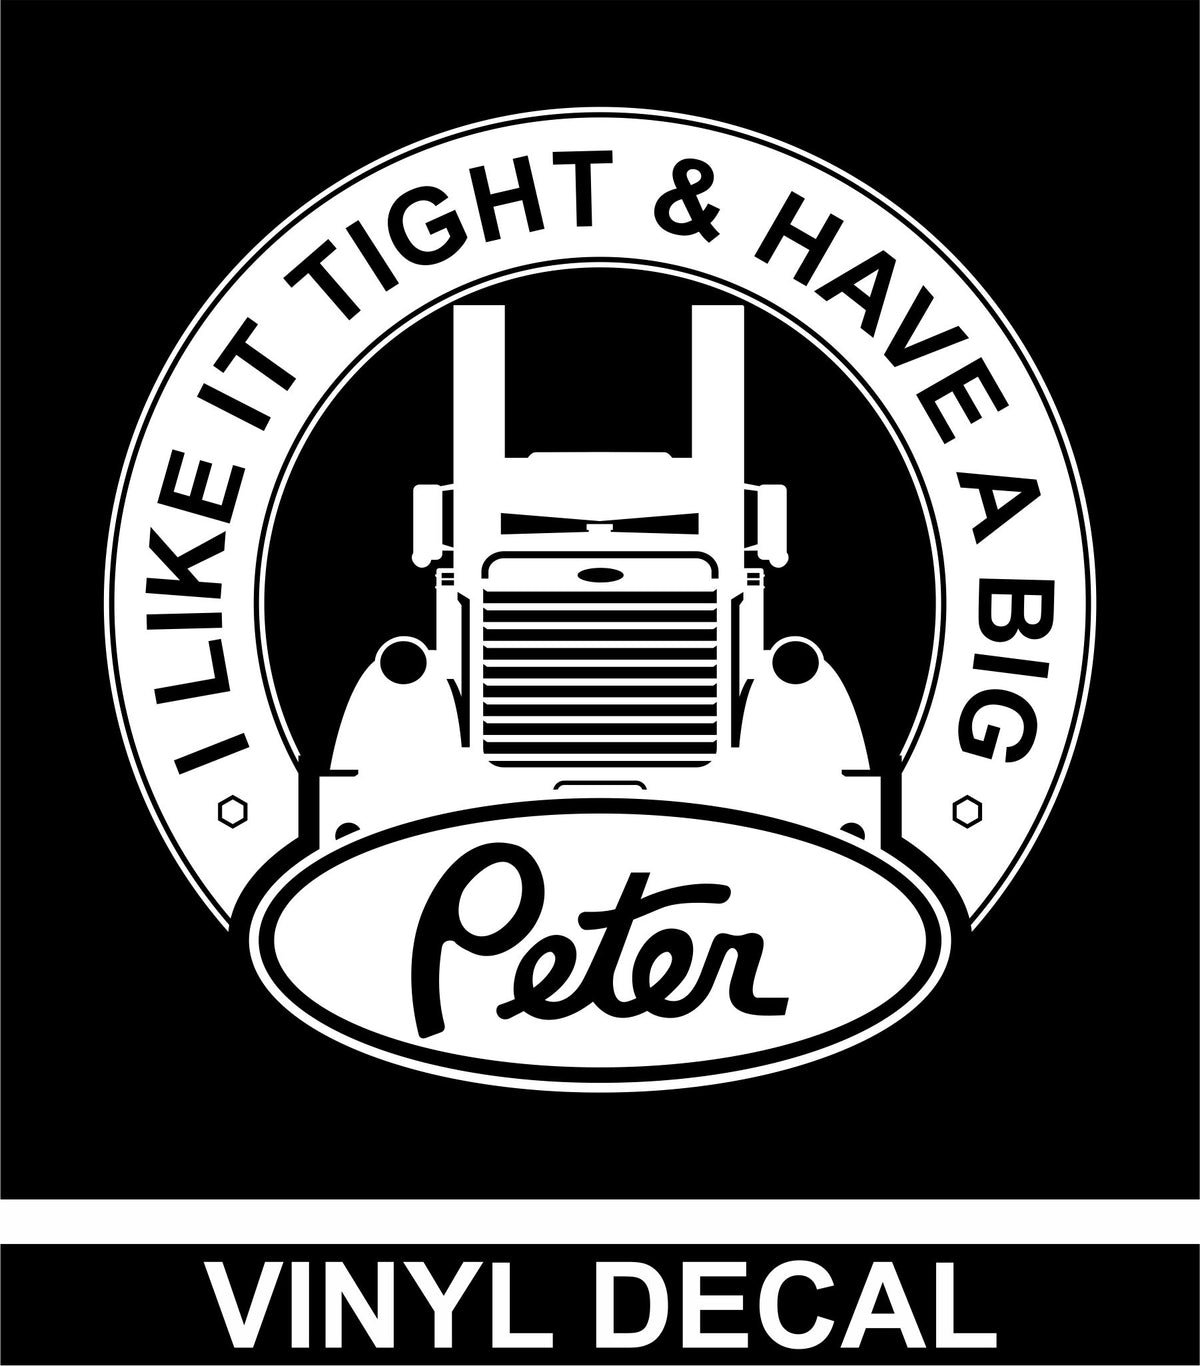 I Like It Tight and Have a Big Peter - Vinyl Decal - Free Shipping